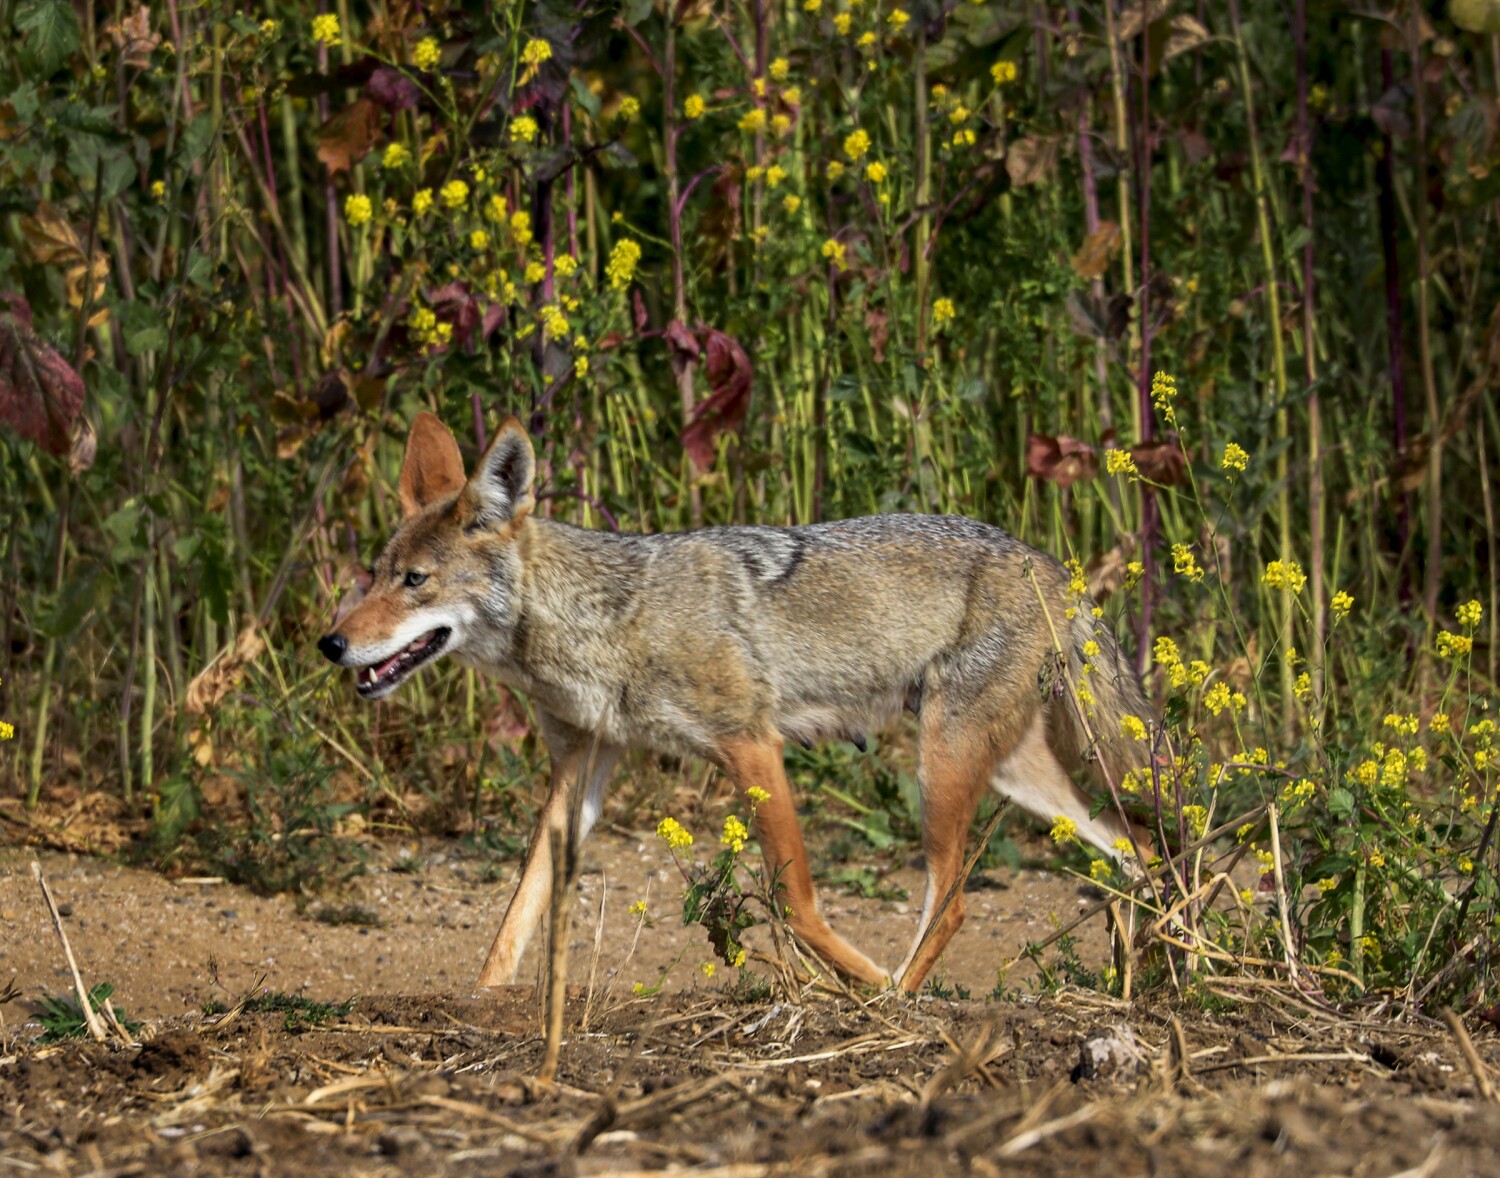 Coyote attacks 2-year-old girl in Fountain Valley